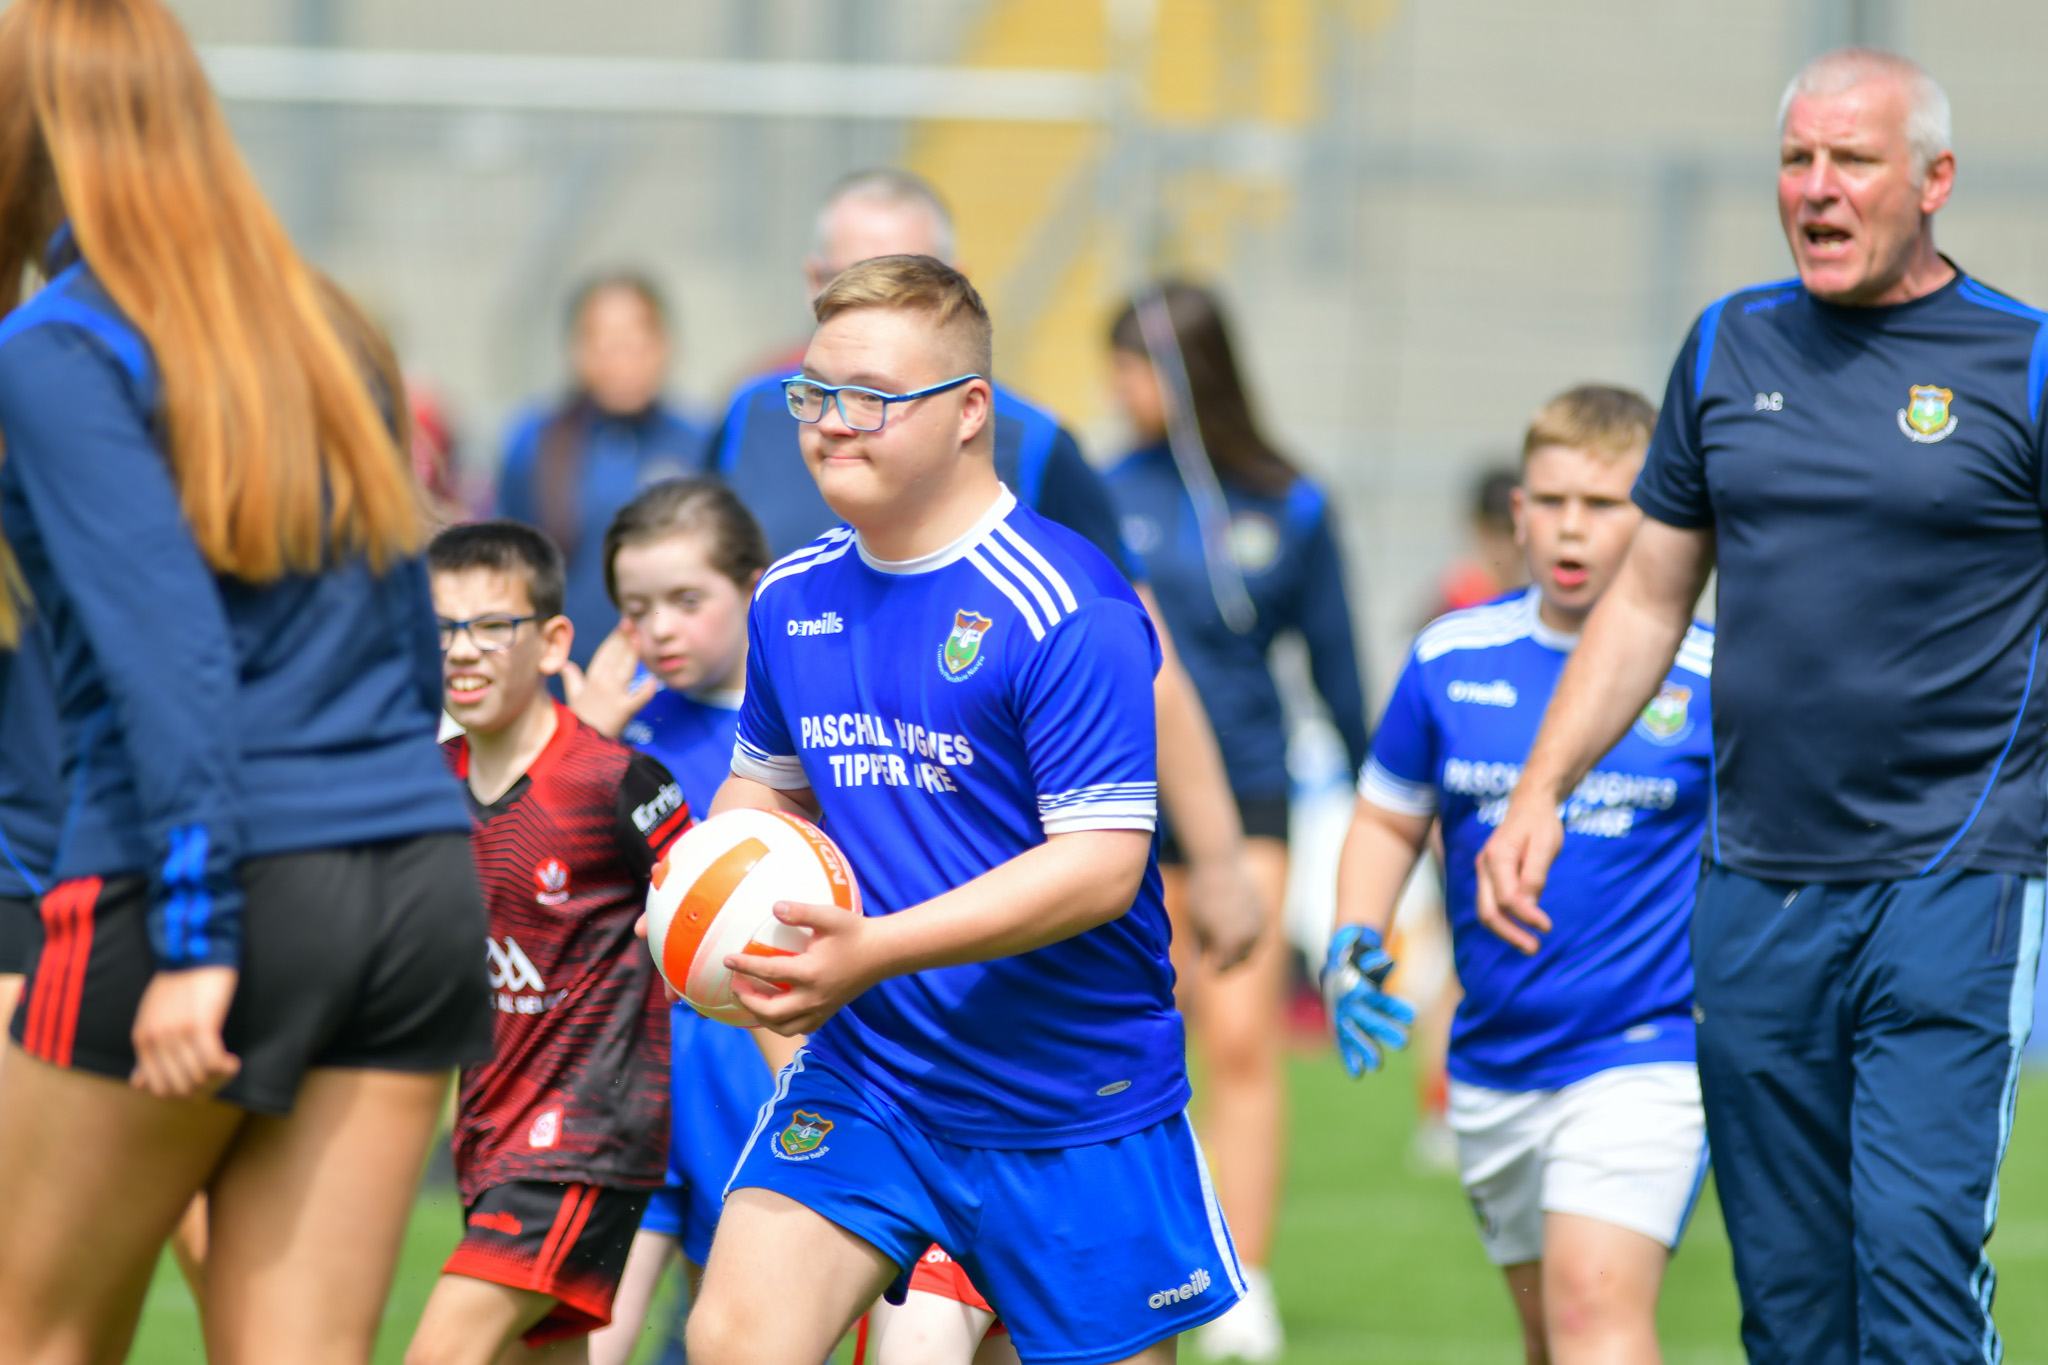 Ulster GAA For All enjoy day of fun and games at Croke Park